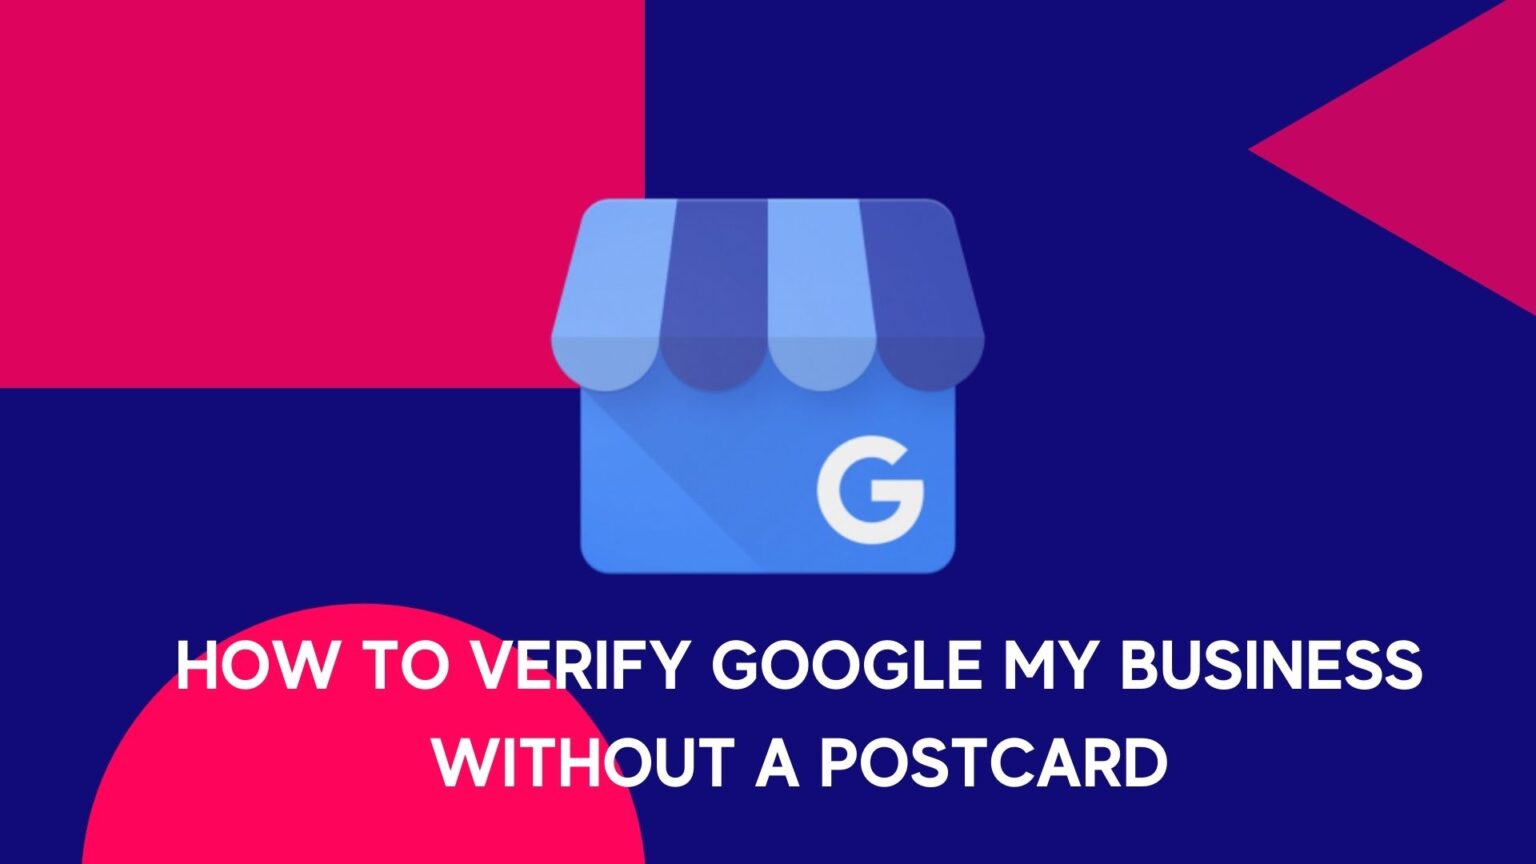 i want to verify my business on google